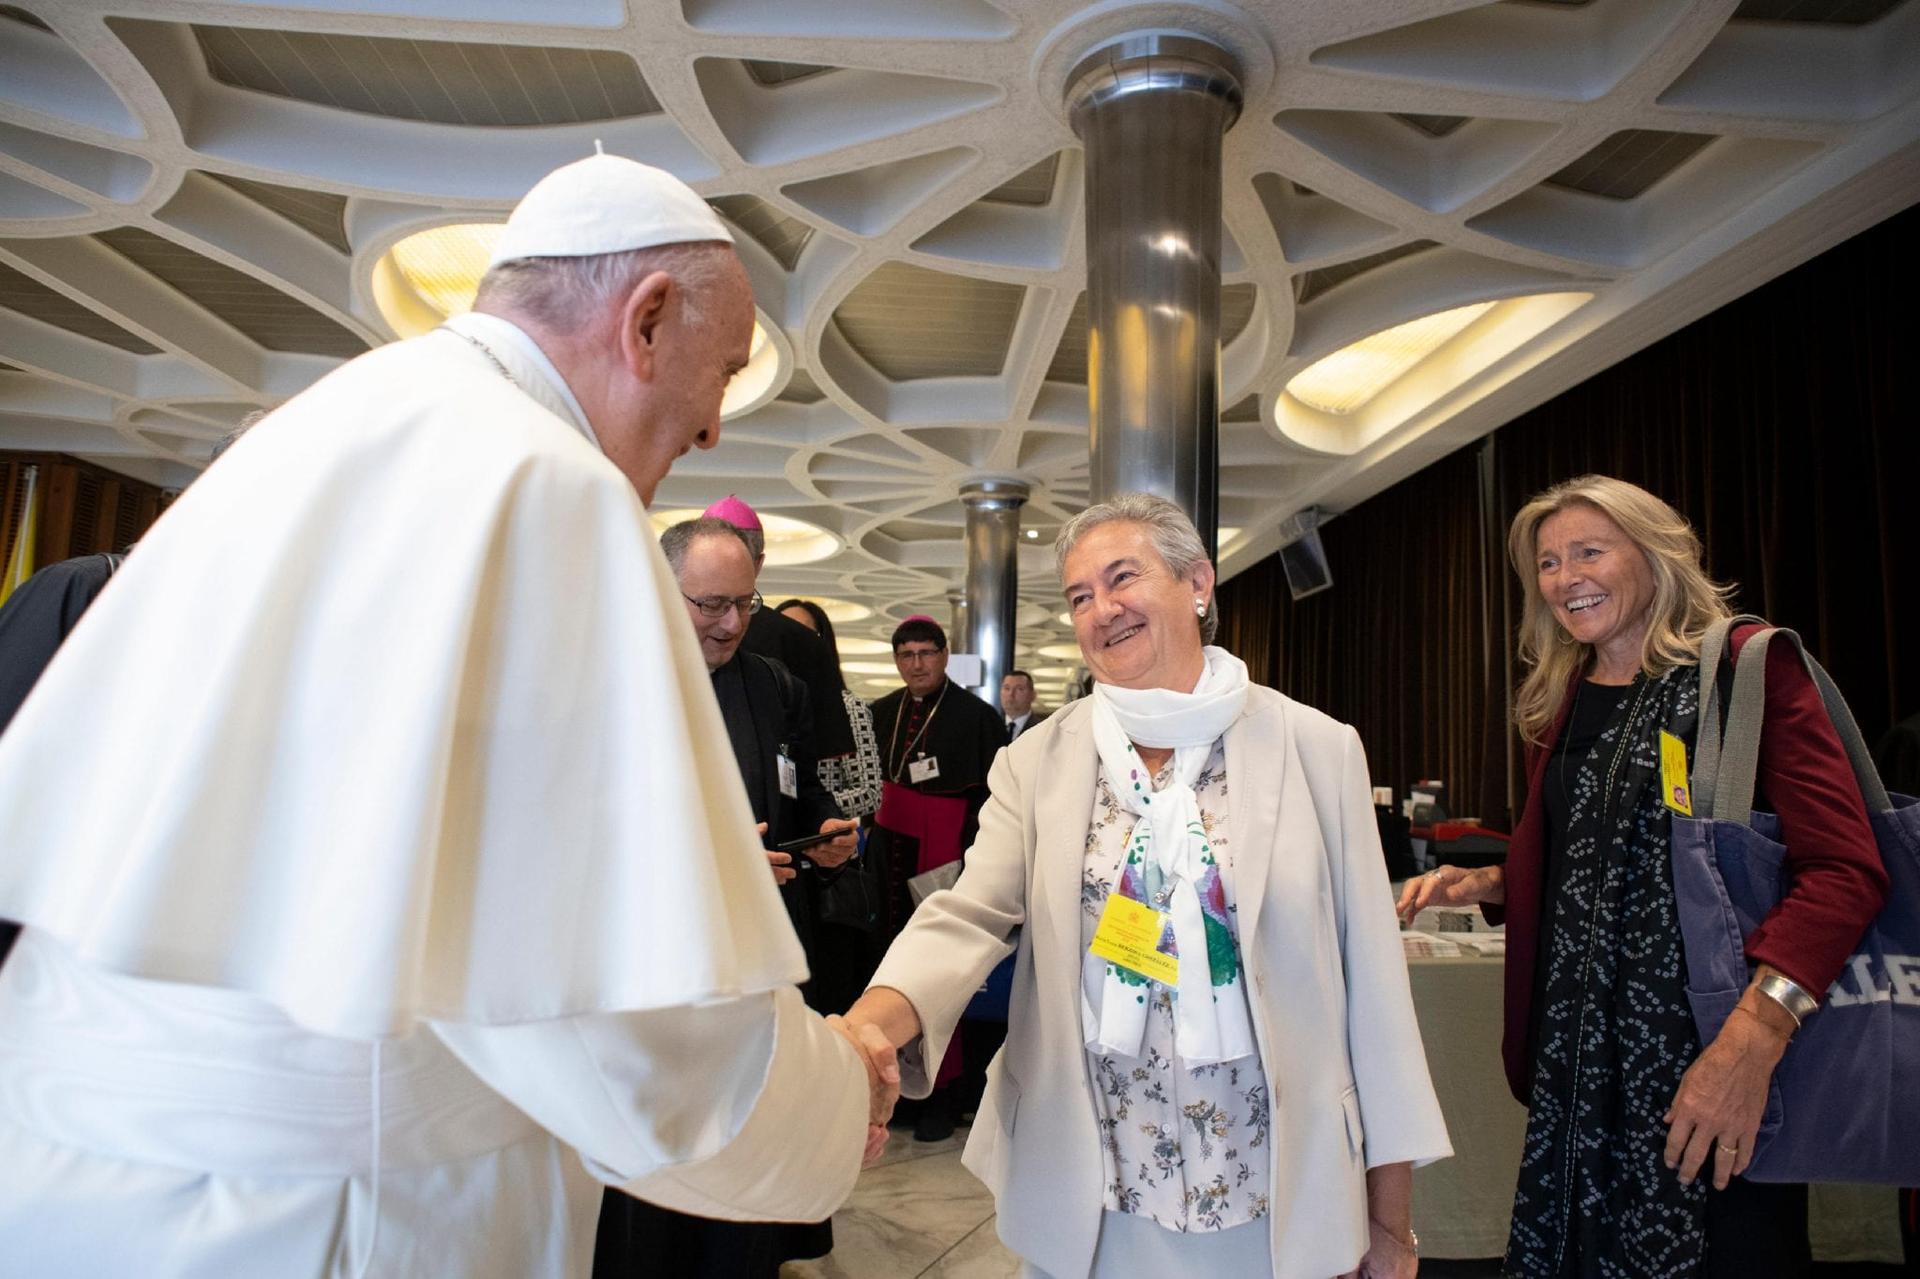 New member of Synod office says pope making ‘small steps’ for women